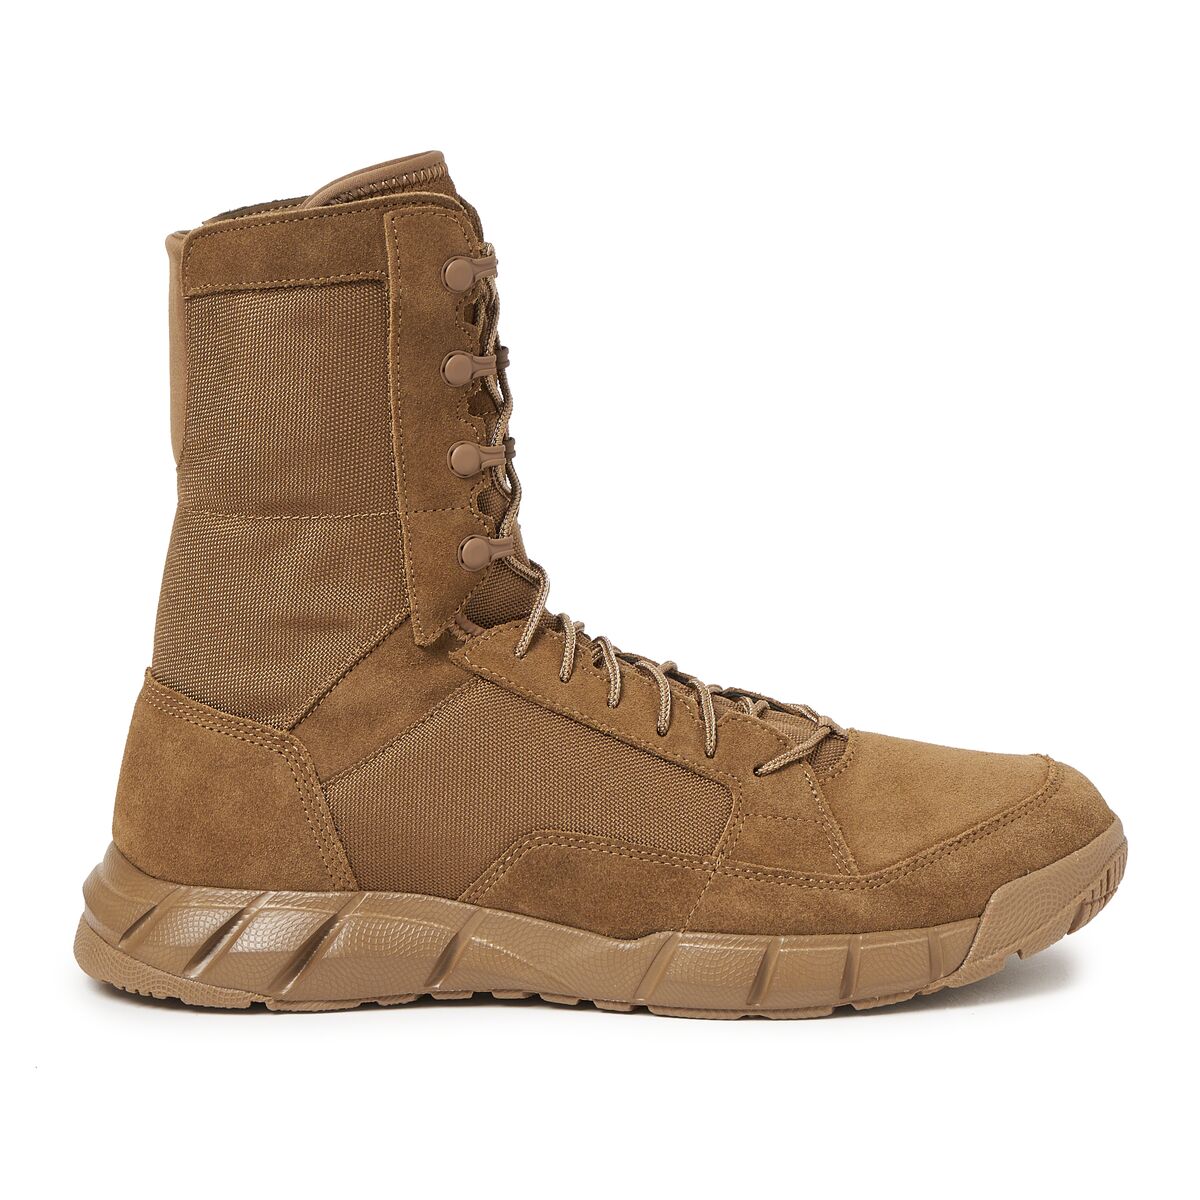 oakley military boots